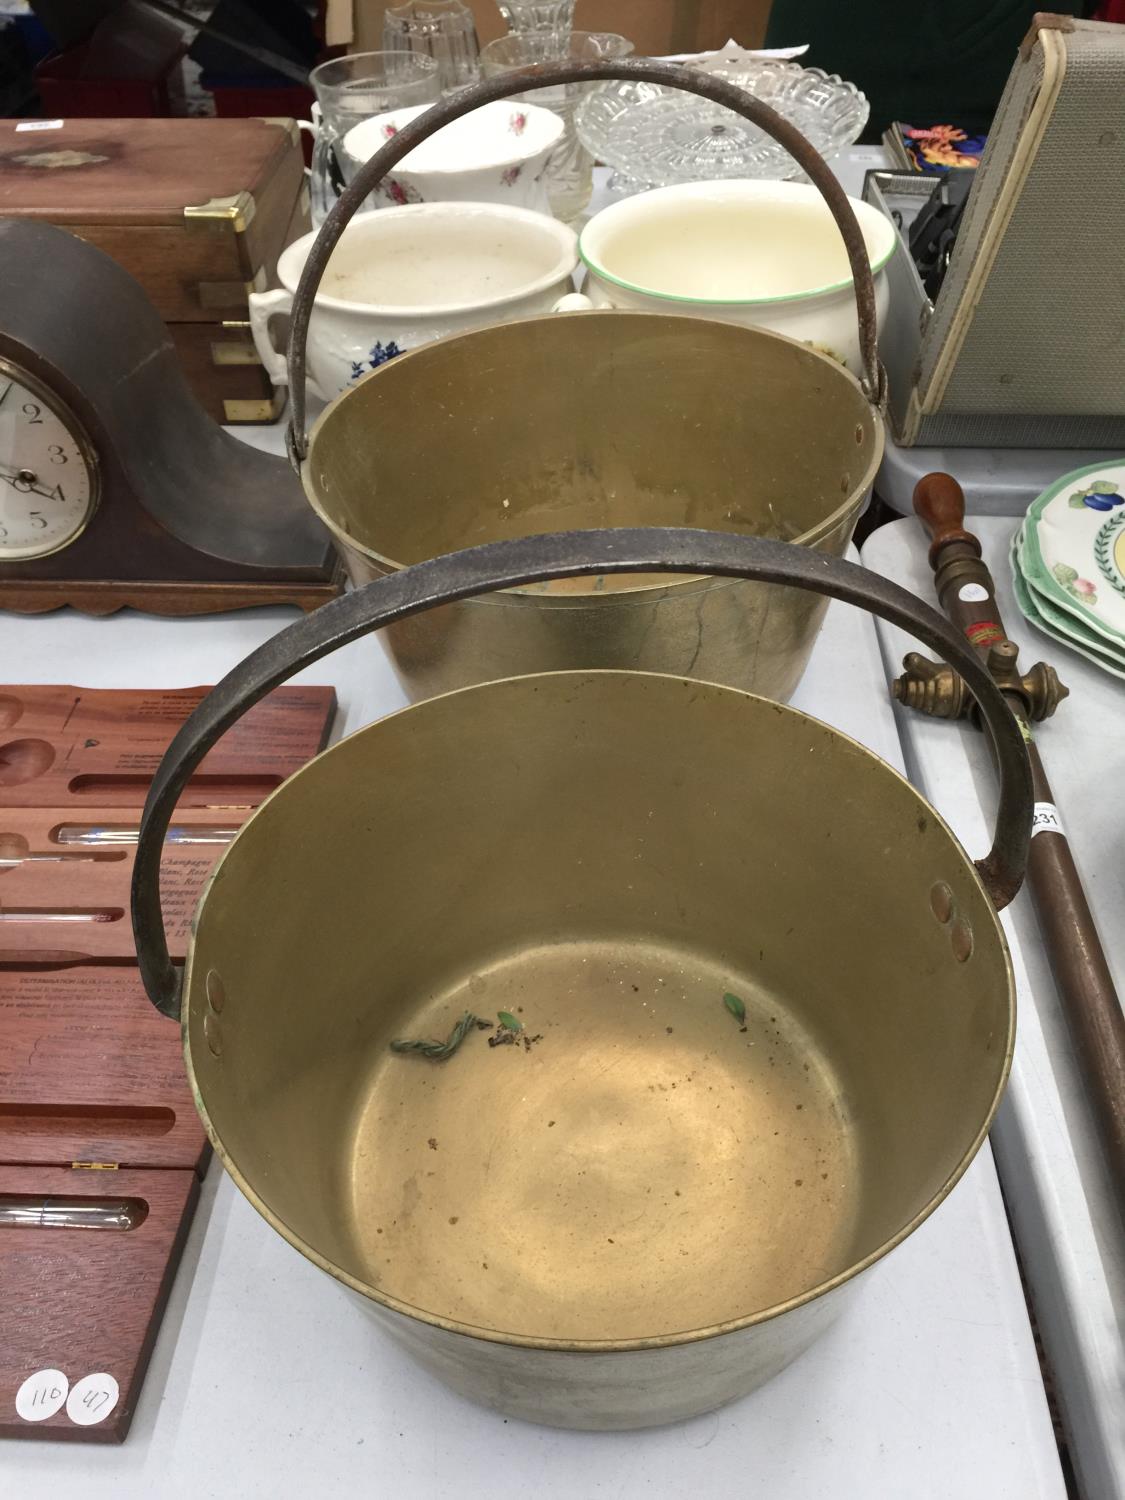 TWO HEAVY BRASS JAM PANS, DIAMETERS 32CM AND 30CM